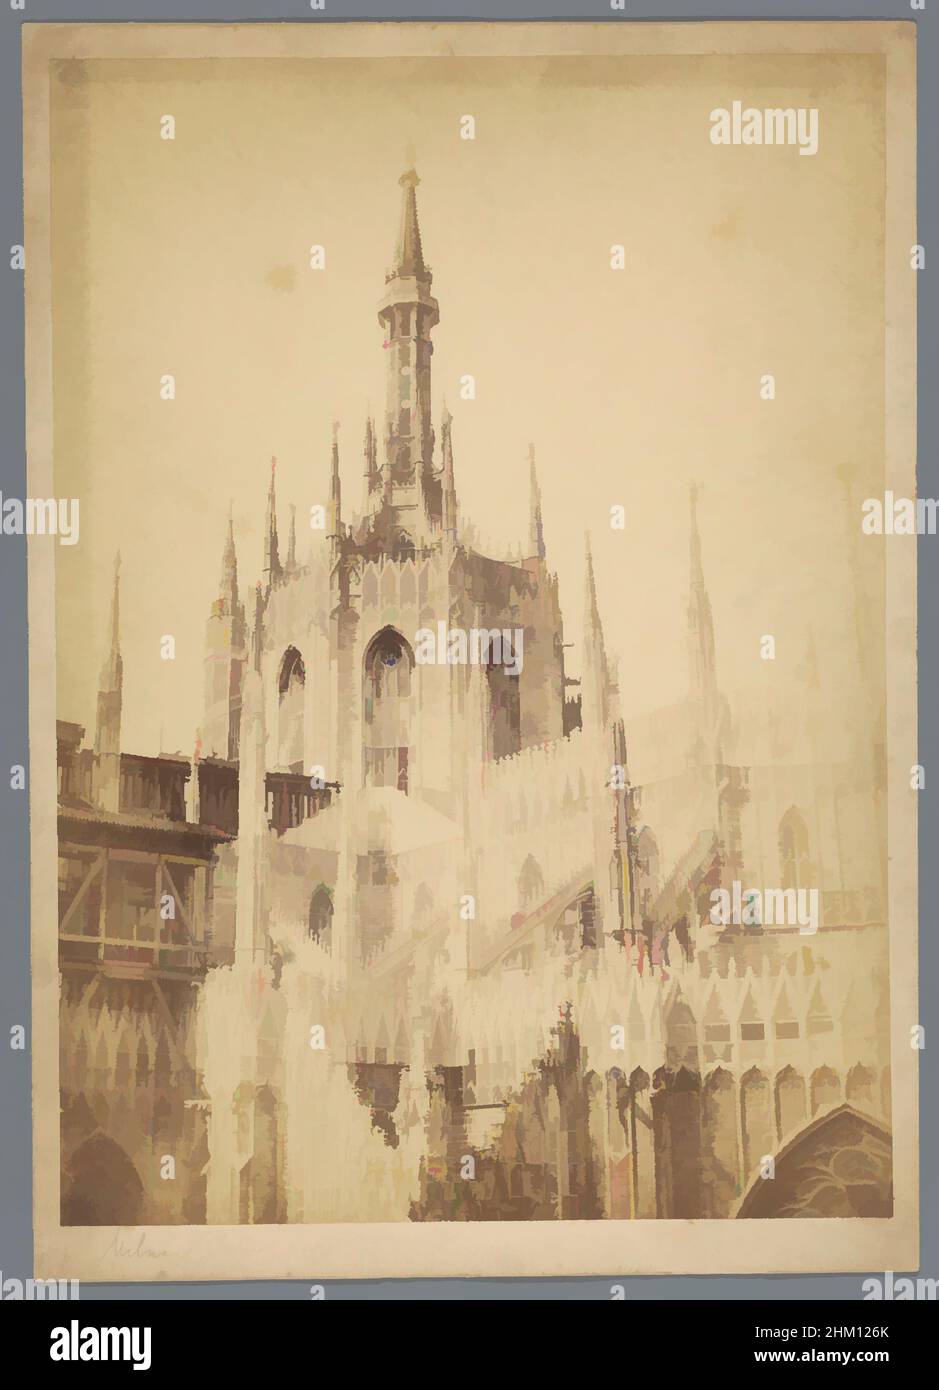 Art inspired by Detail of the cathedral of Milan, Italy Milan Cathedral,  Milaan, 1851 - 1900, cardboard, paper, albumen print, height 401 mm × width  275 mm, Classic works modernized by Artotop